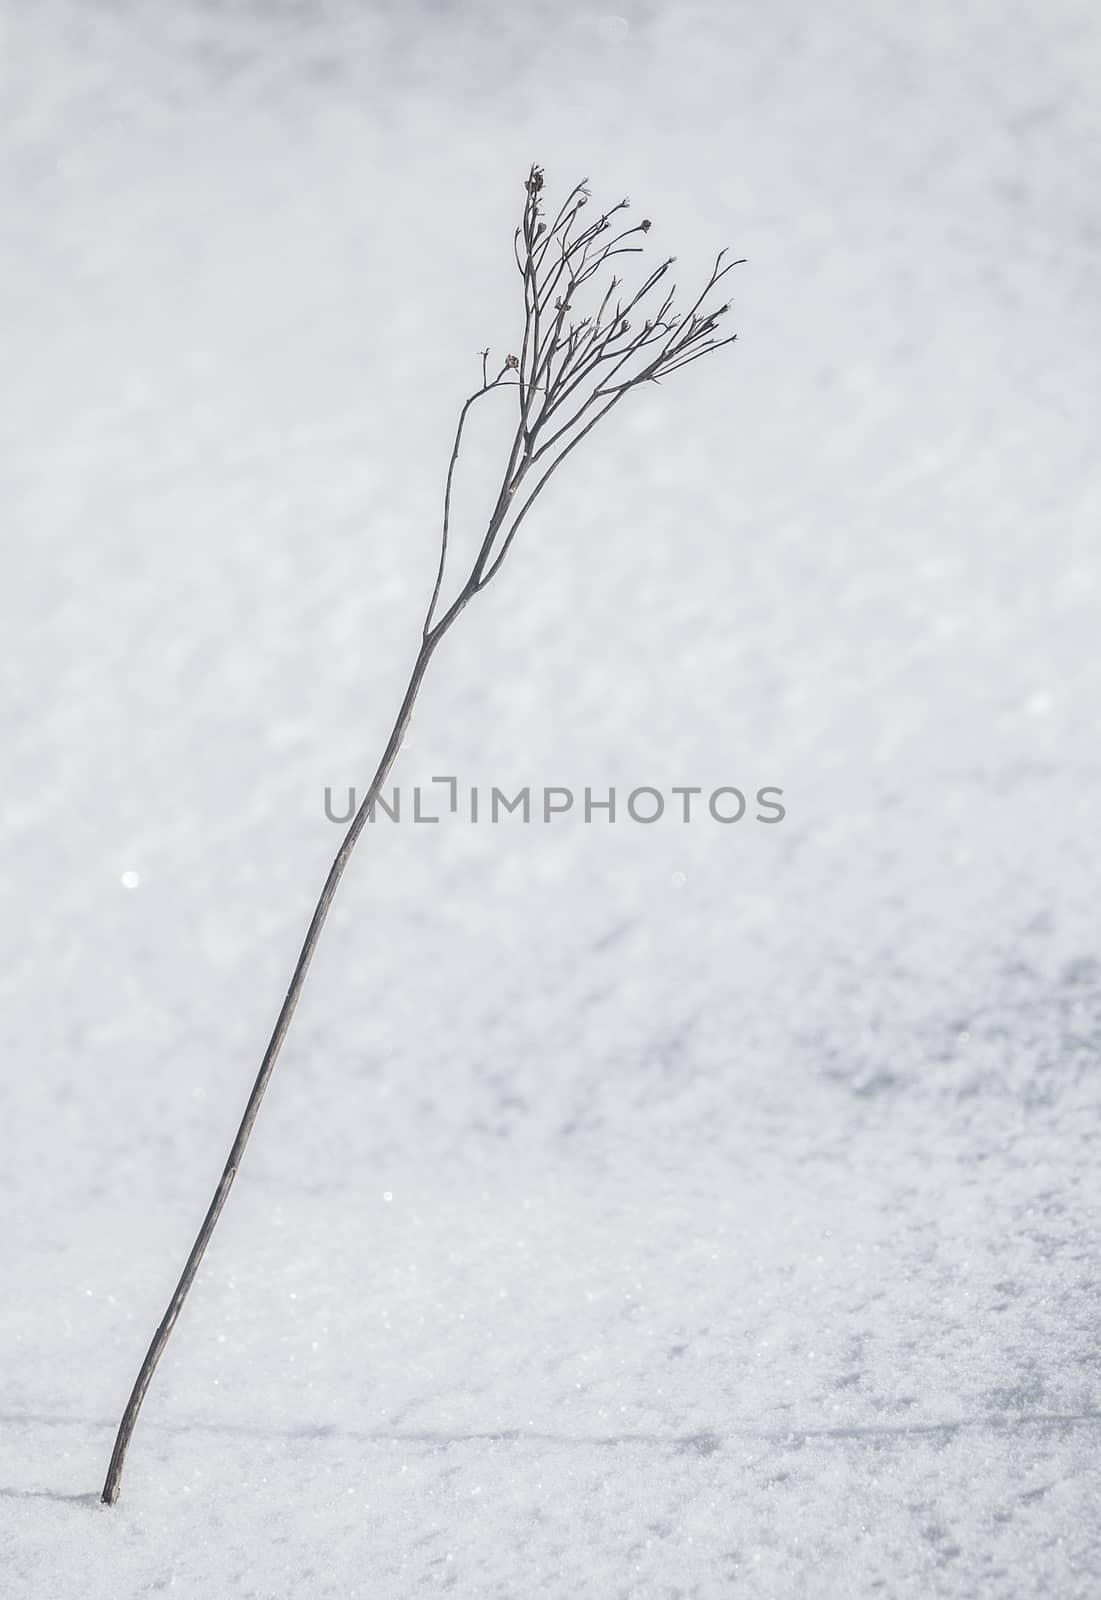 Seasonal Image Of A Plant Through Snow With Copy Space